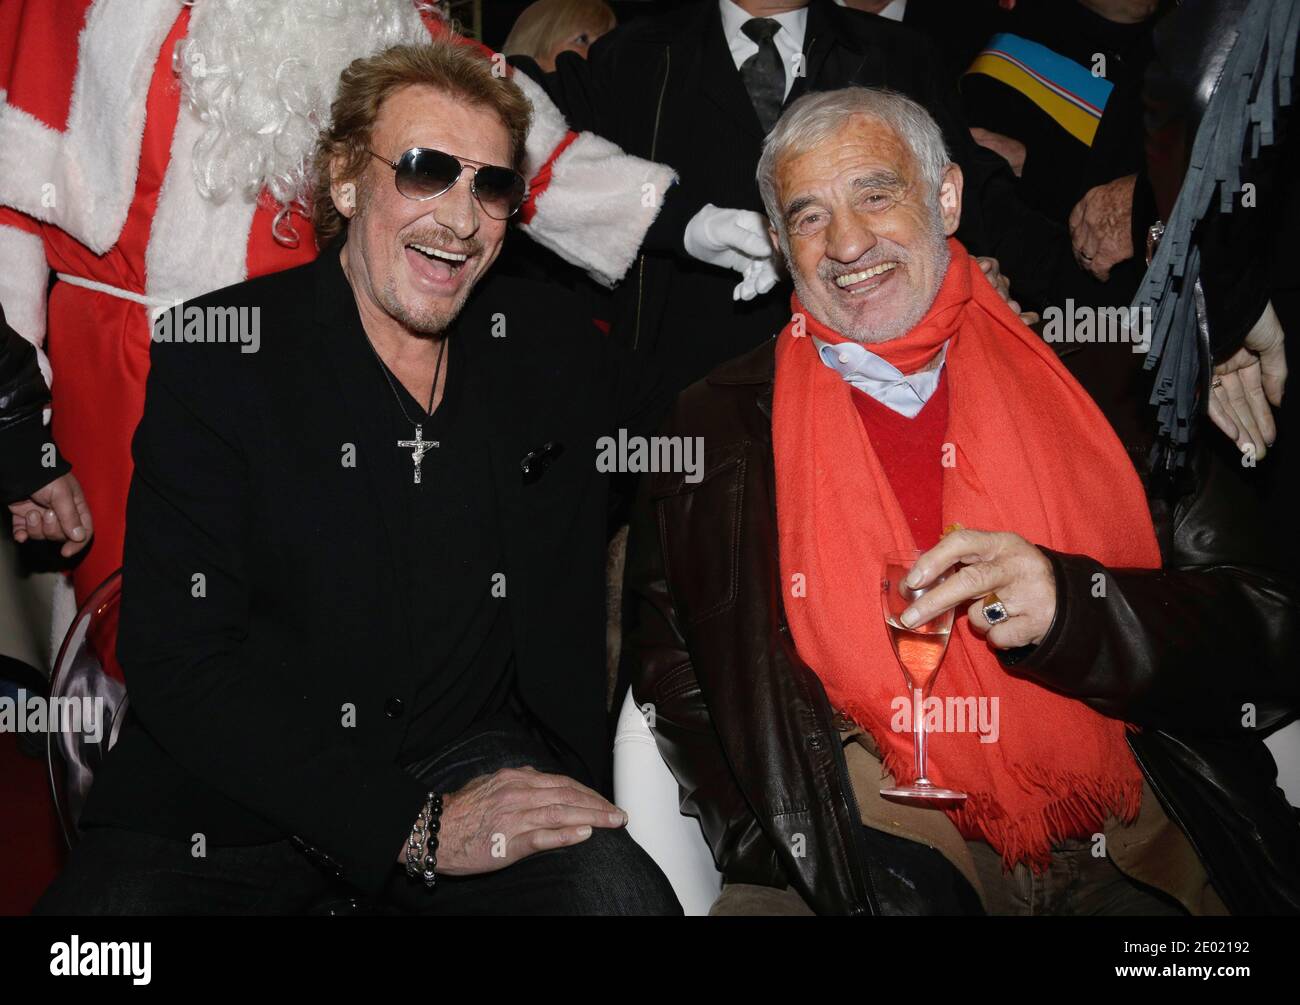 File photo : Johnny Hallyday and Jean-Paul Belmondo attending the Grand Palais funfair Party hosted by Marcel Campion in Paris, France on December 19, 2013. France's biggest rock star Johnny Hallyday has died from lung cancer, his wife says. He was 74. The singer - real name Jean-Philippe Smet - sold about 100 million records and starred in a number of films. Photo by Jerome Domine/ABACAPRESS.COM Stock Photo